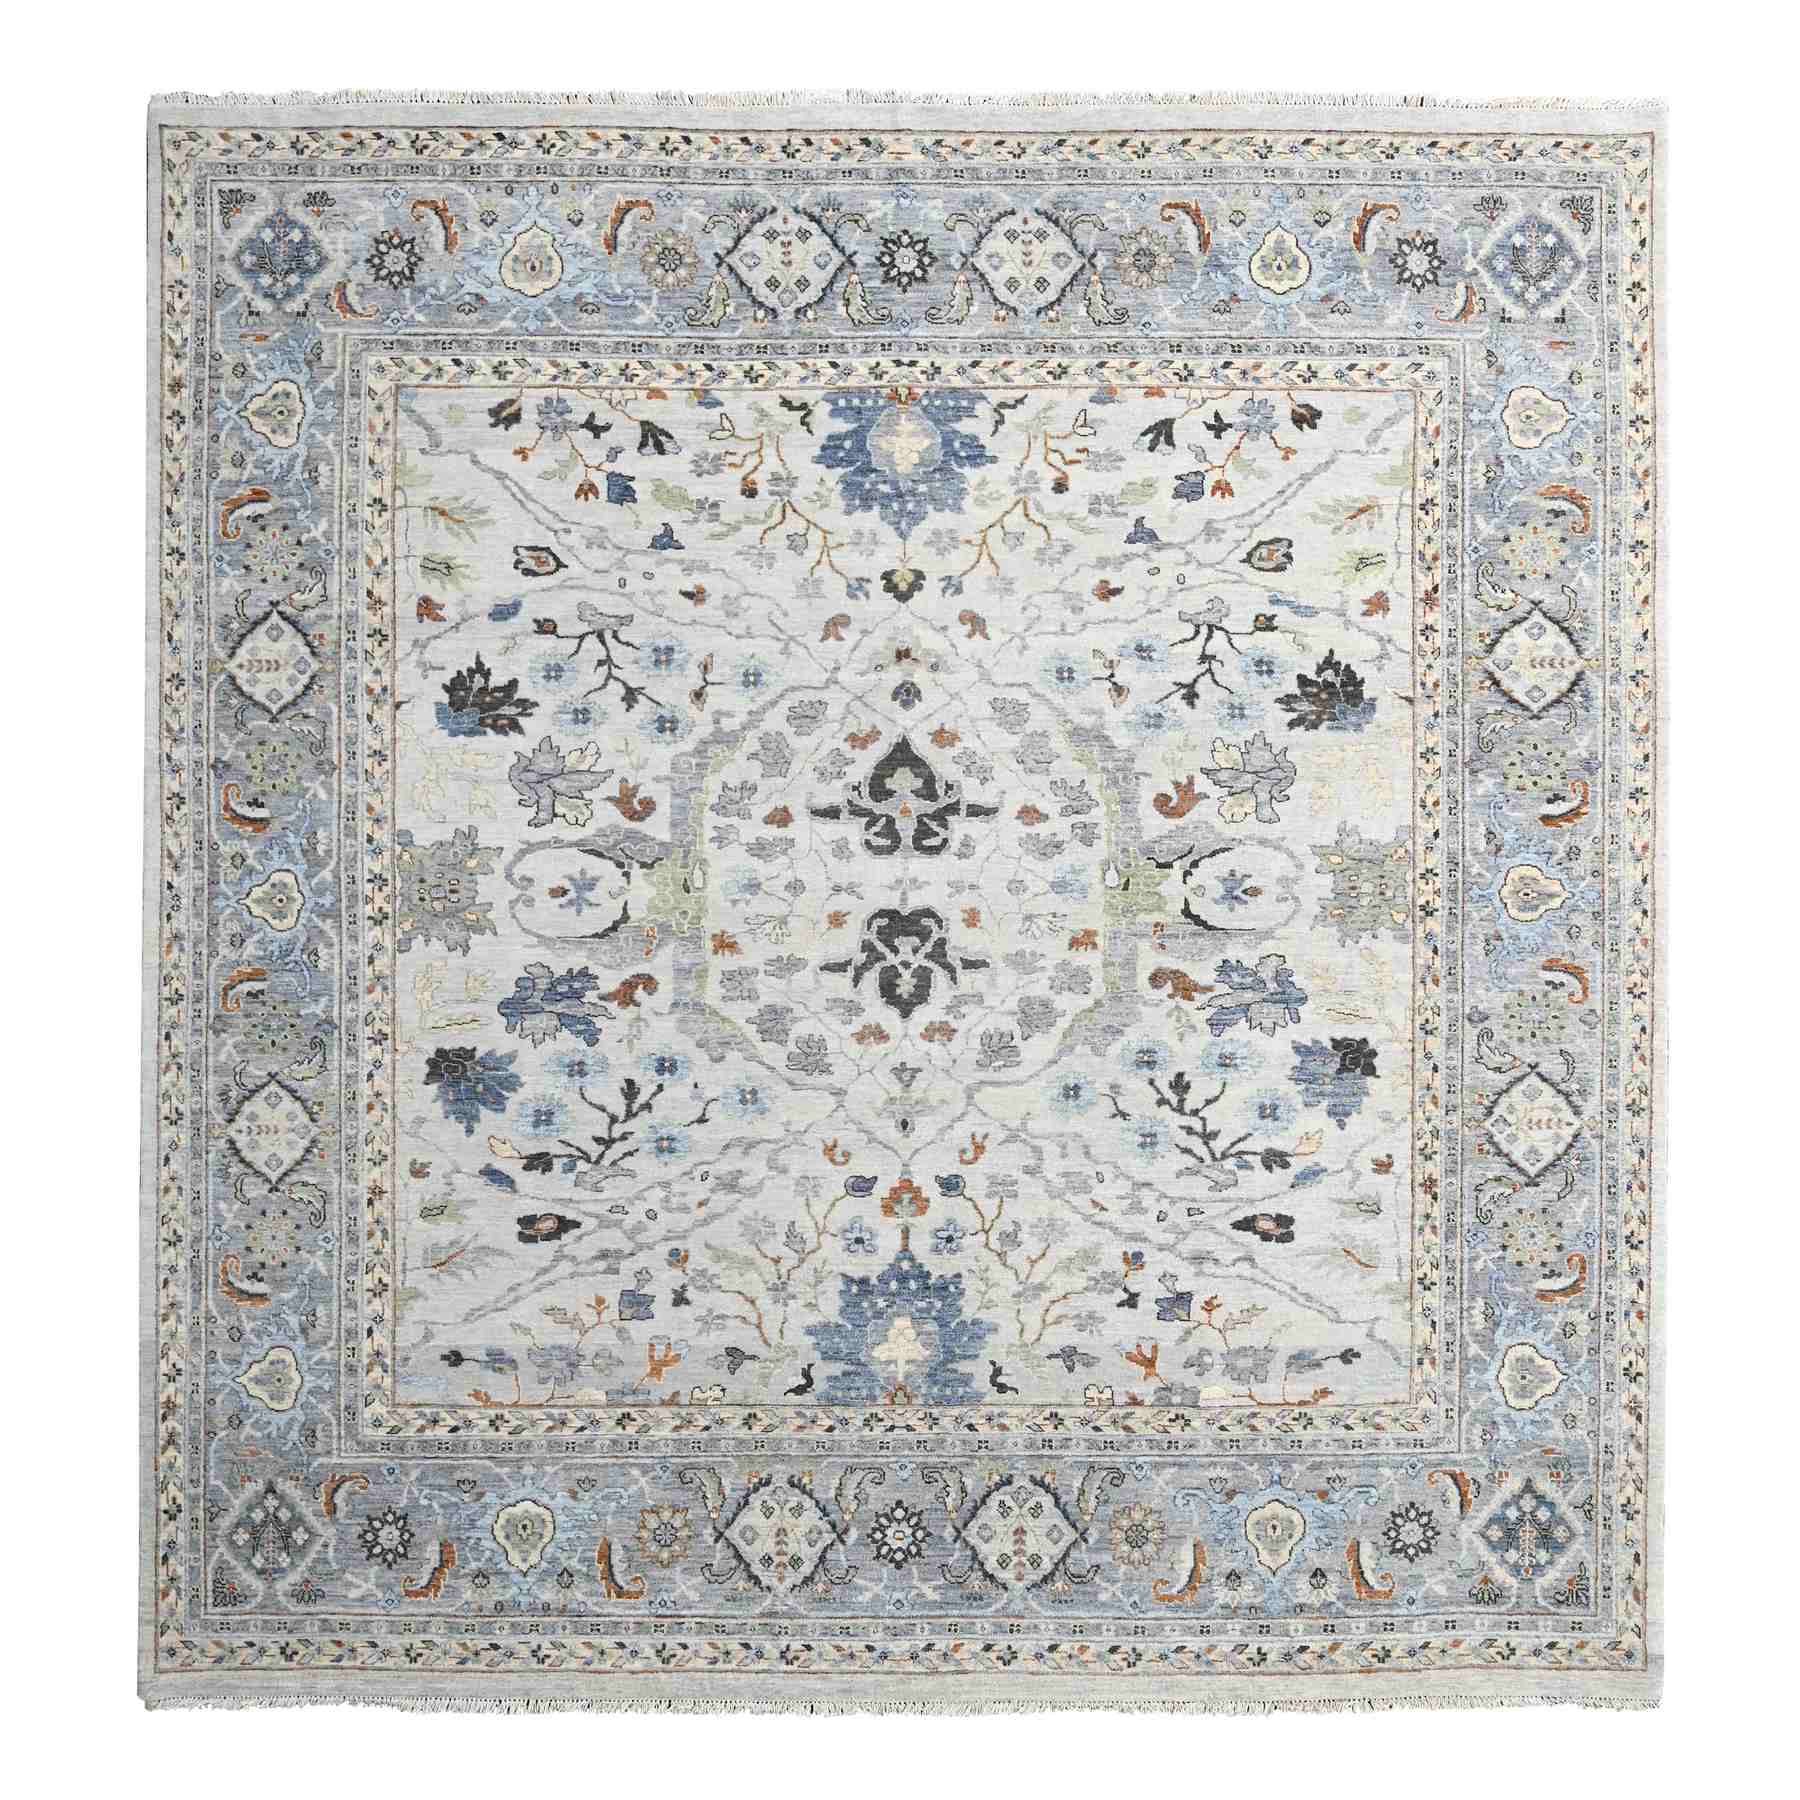 Summer and Sharkfin Gray, Denser Weave Oushak All Over Floral Design, Natural Dyes, Shiny Wool, Hand Knotted Square Oriental Rug